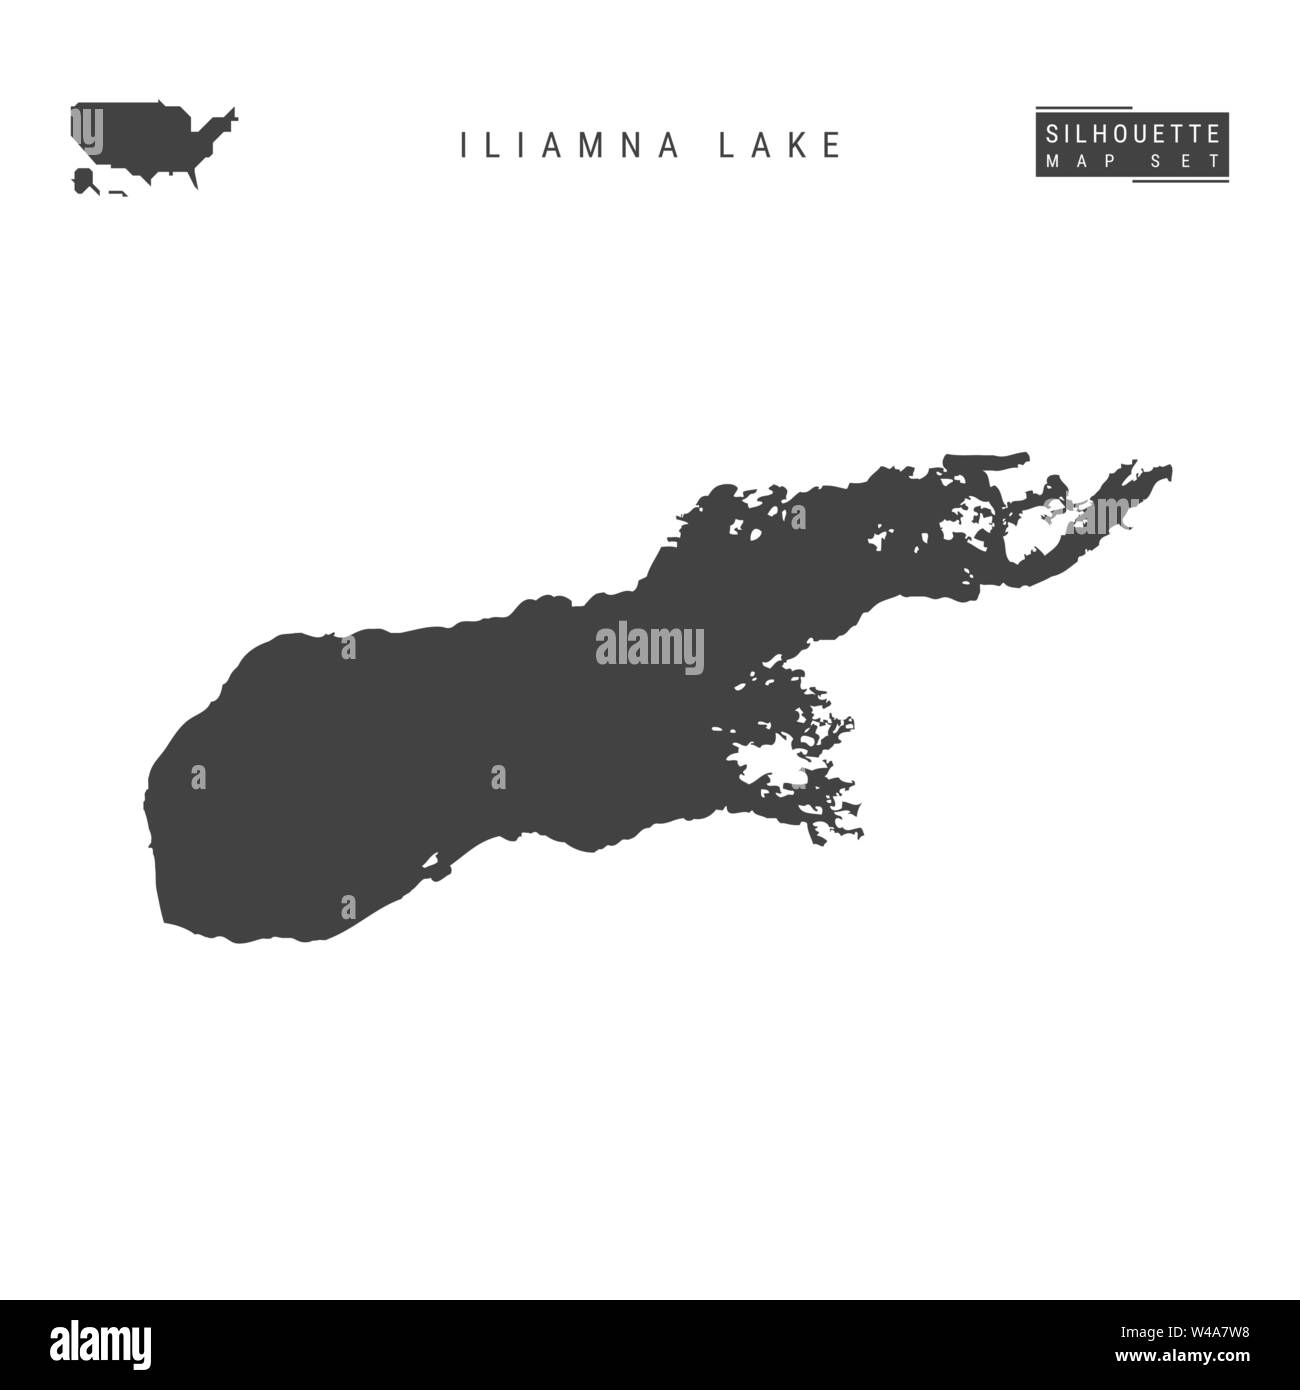 Iliamna Lake Blank Vector Map Isolated on White Background. High-Detailed Black Silhouette Map of Iliamna Lake. Stock Vector